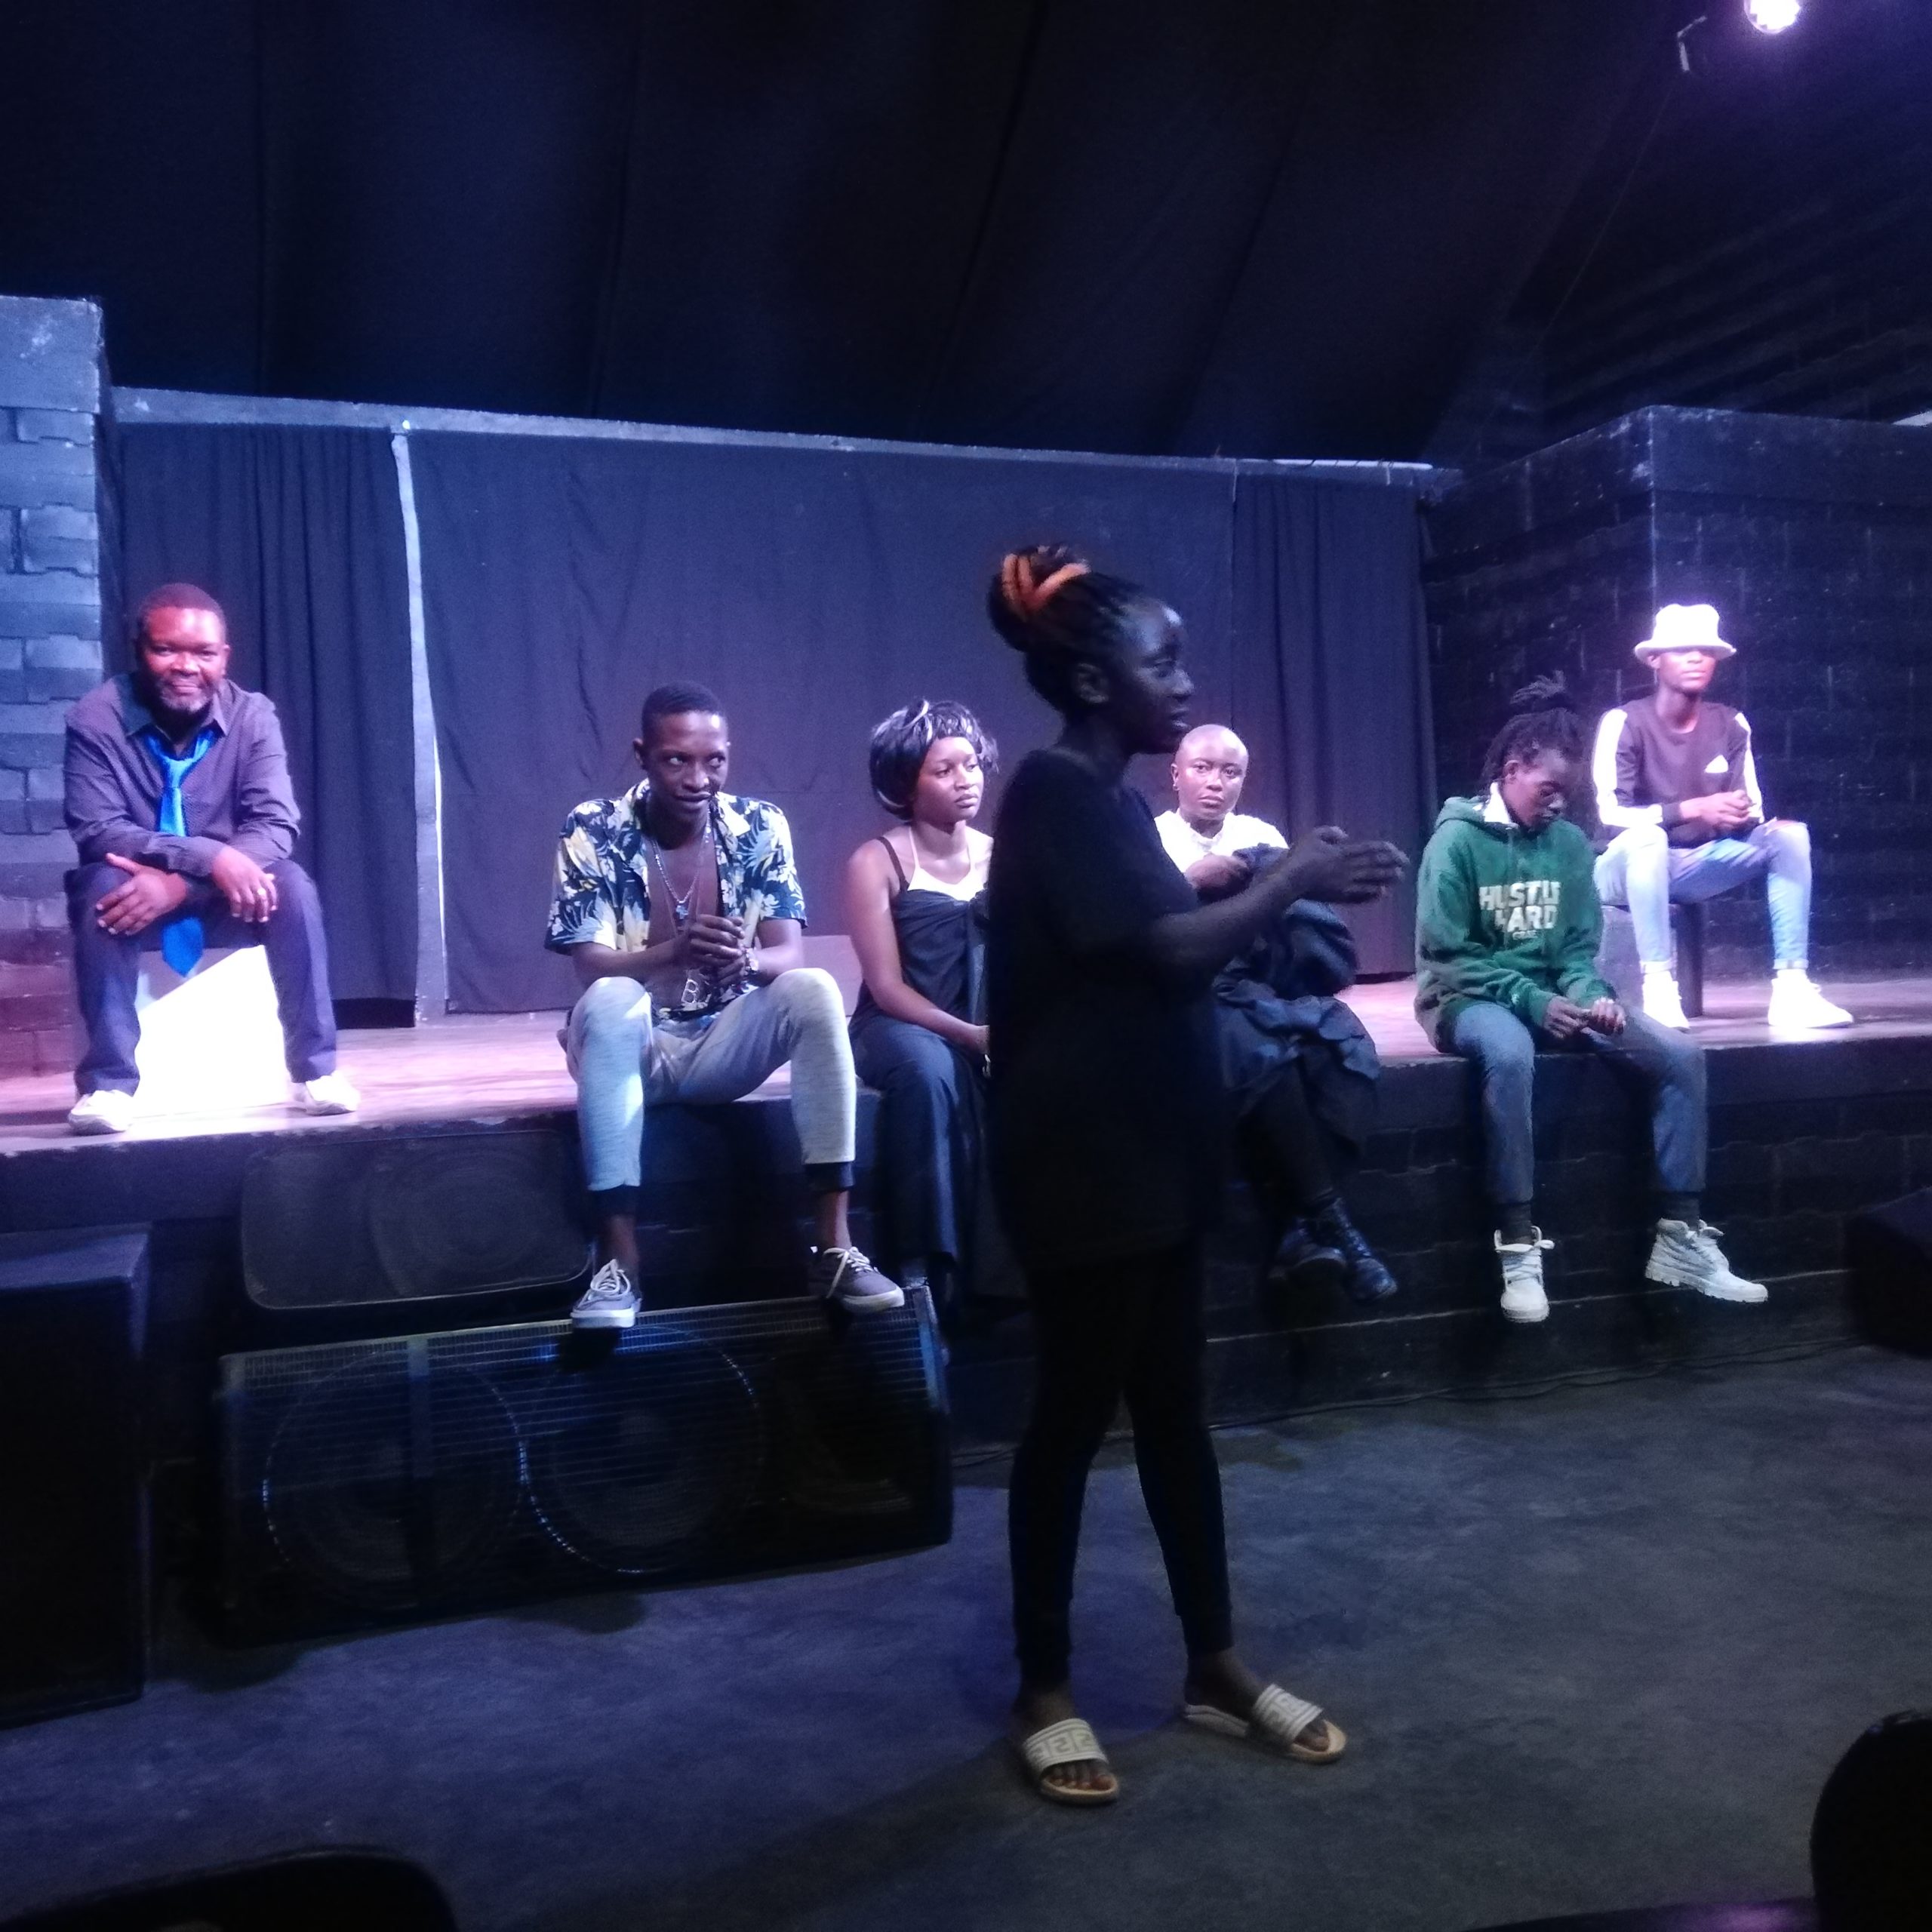 Patsime Trust advocates for sex workers’ rights through exciting play